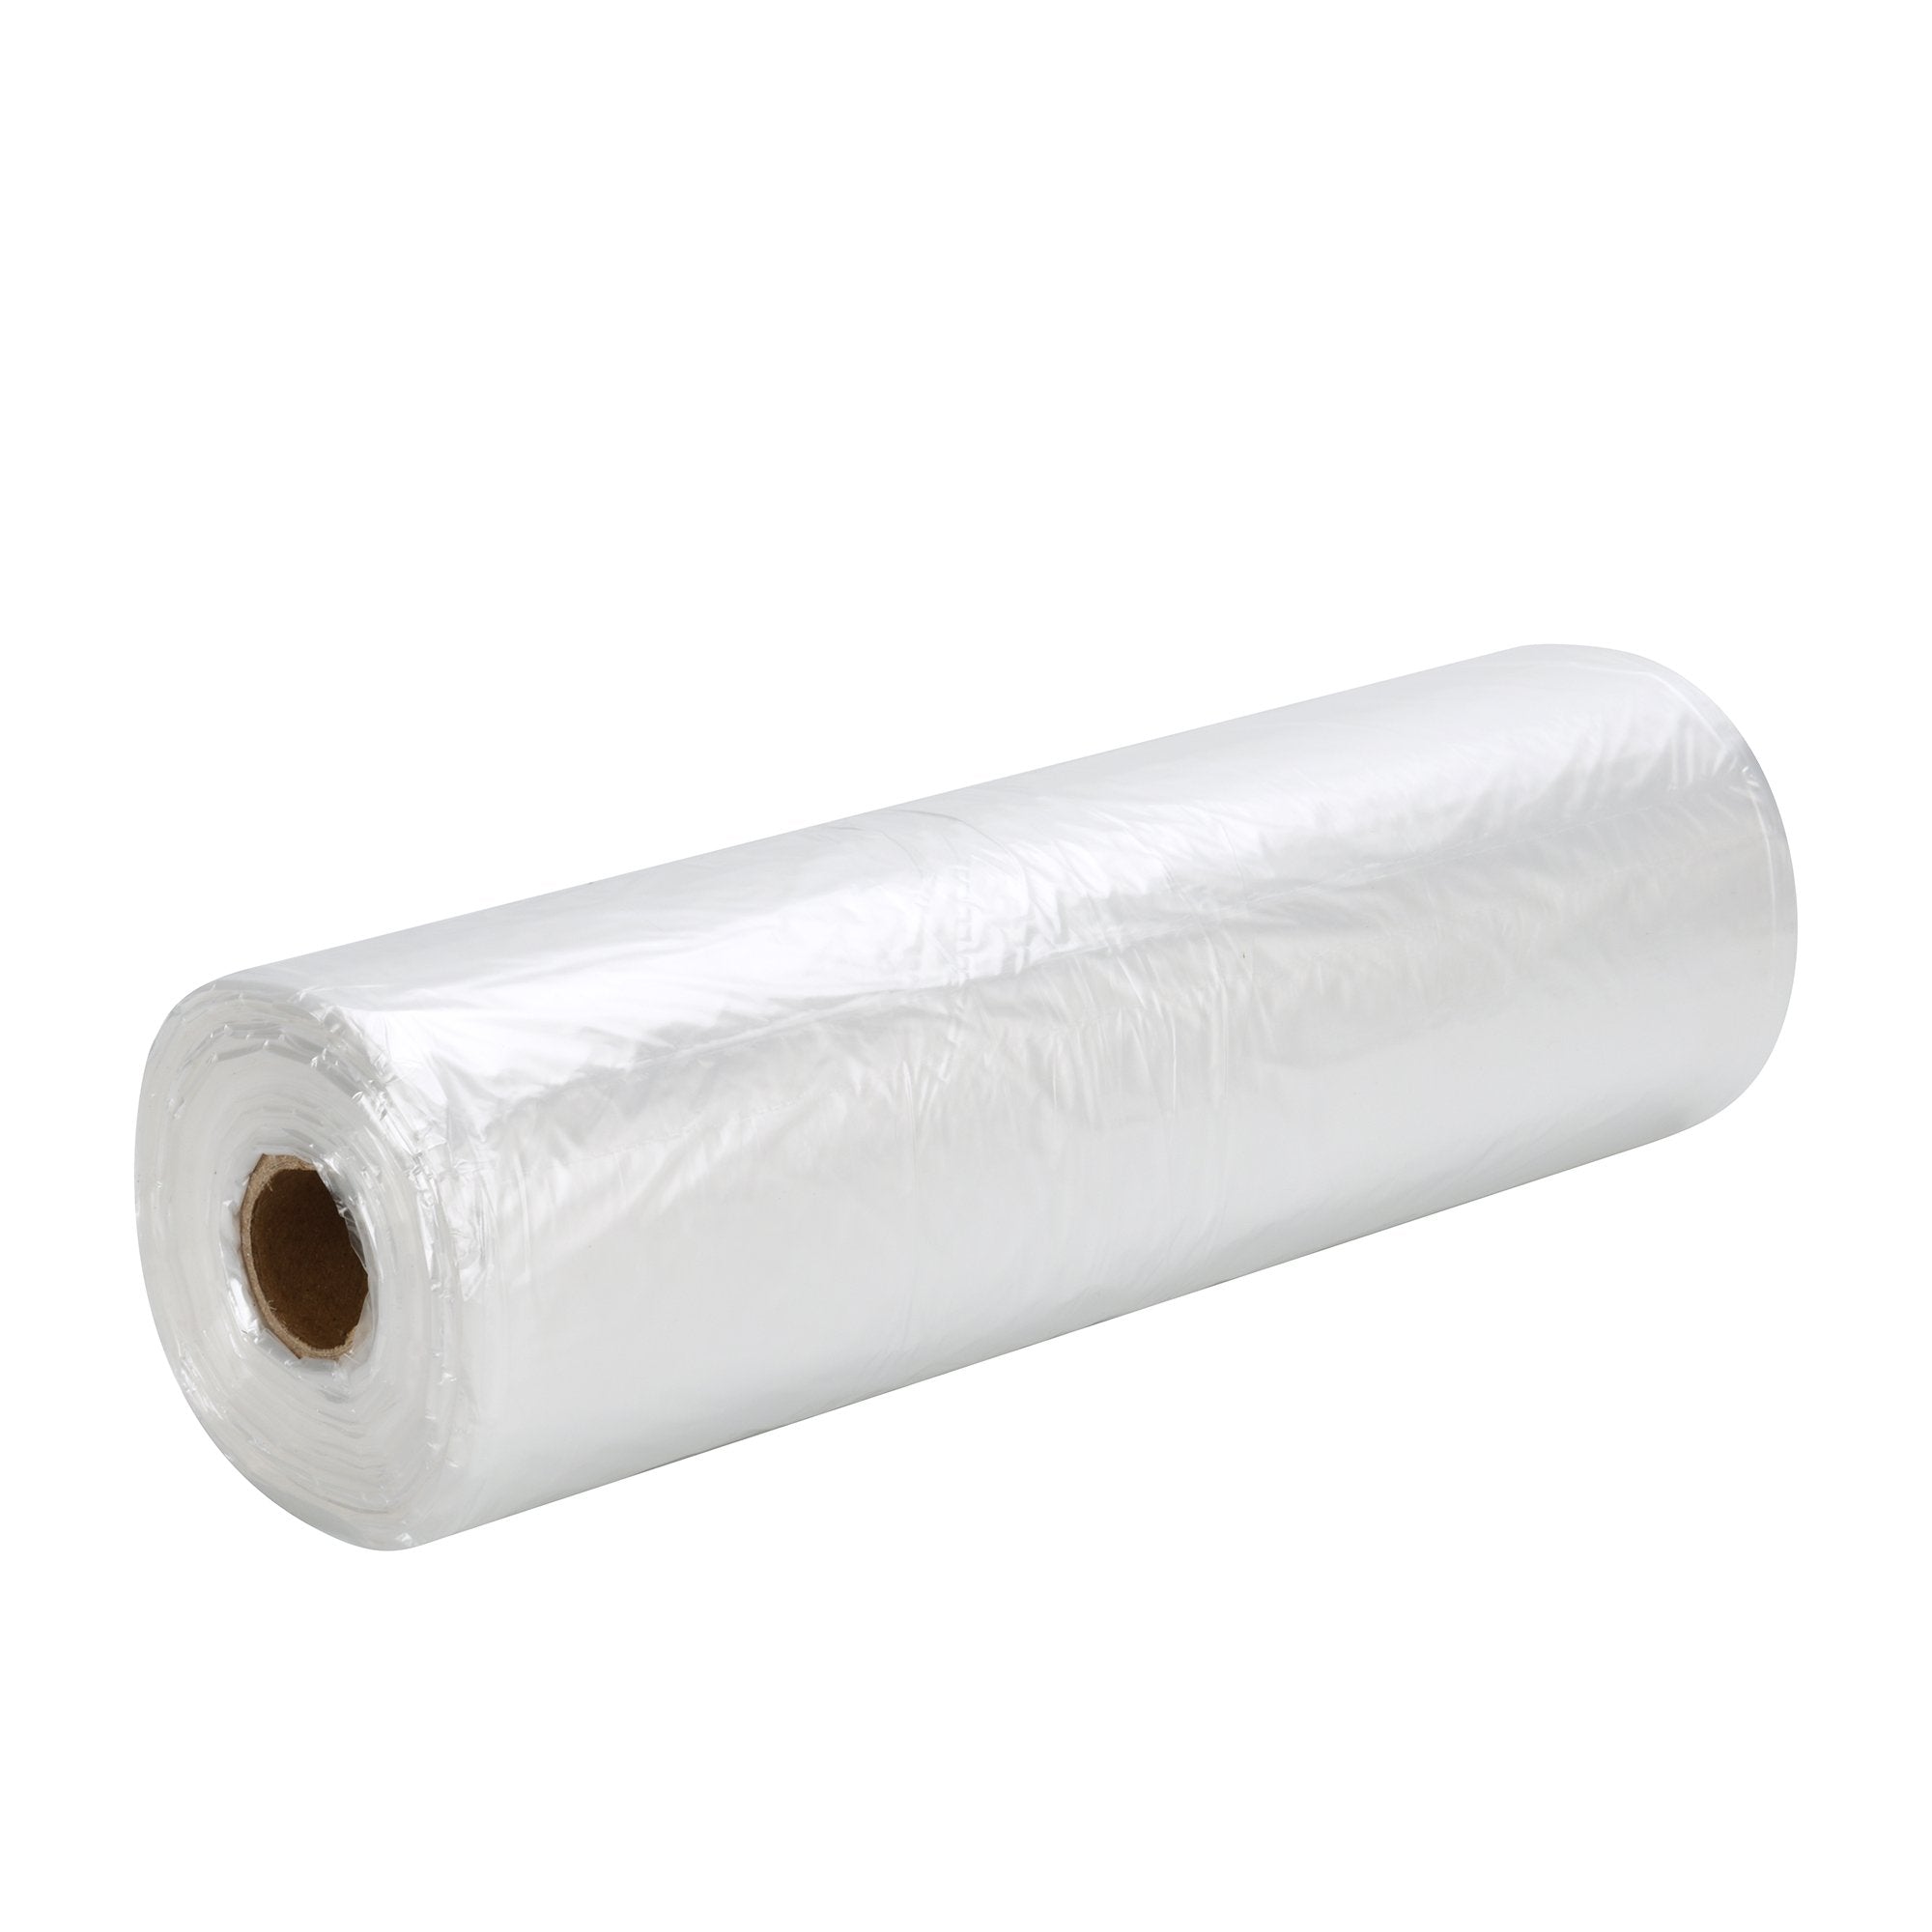 Immuson 12 x 20 Plastic Produce Bag on A Roll Food Storage Clear Bags for Fruits Vegetable Bread (350 Bags-1 Roll)